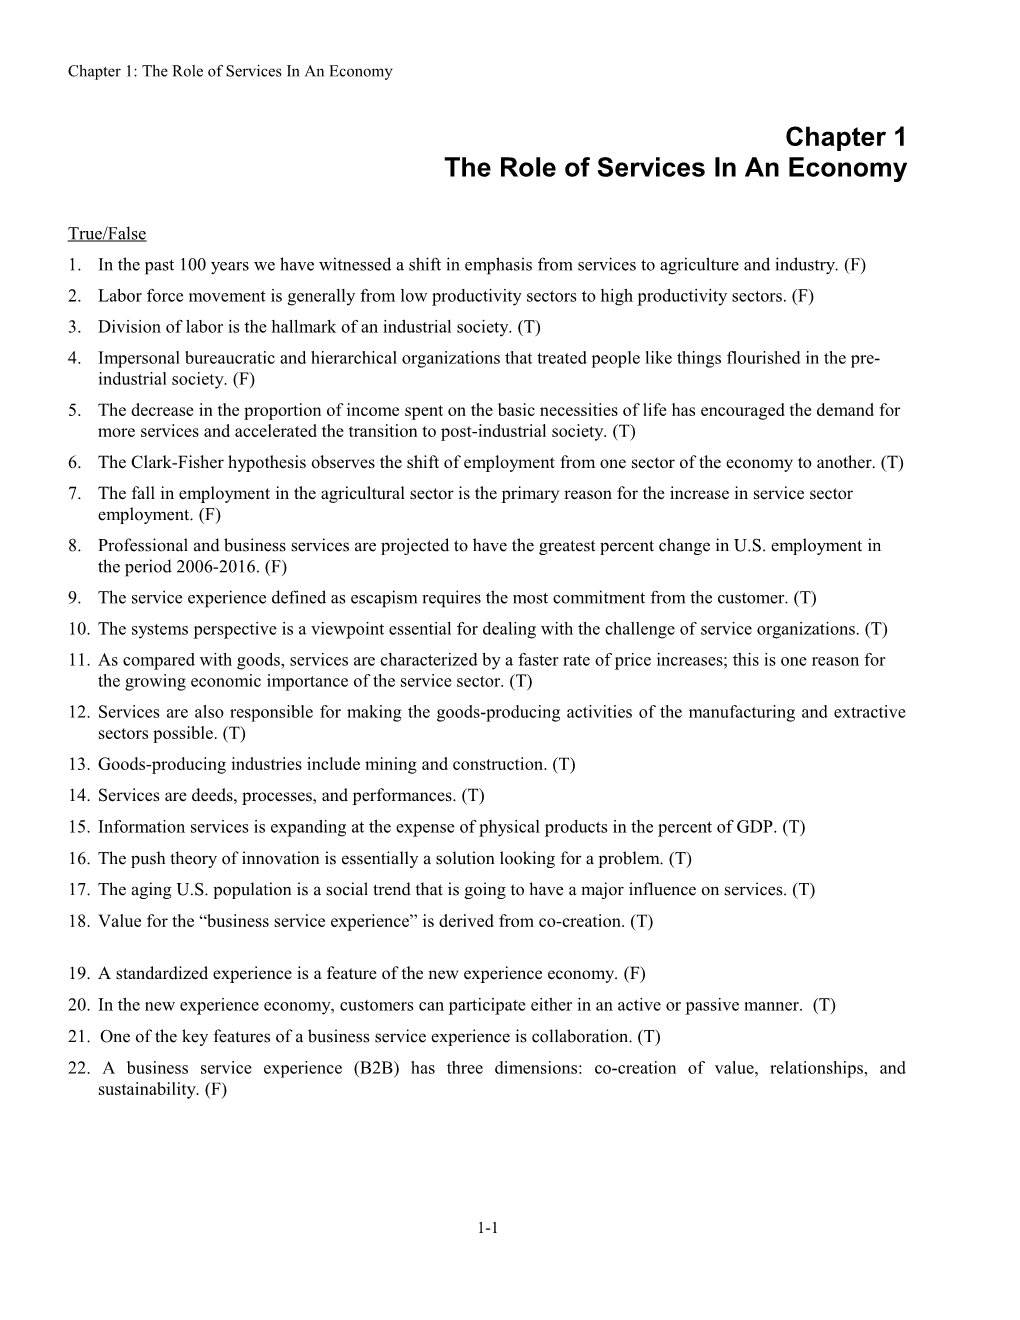 The Role of Services in an Economy